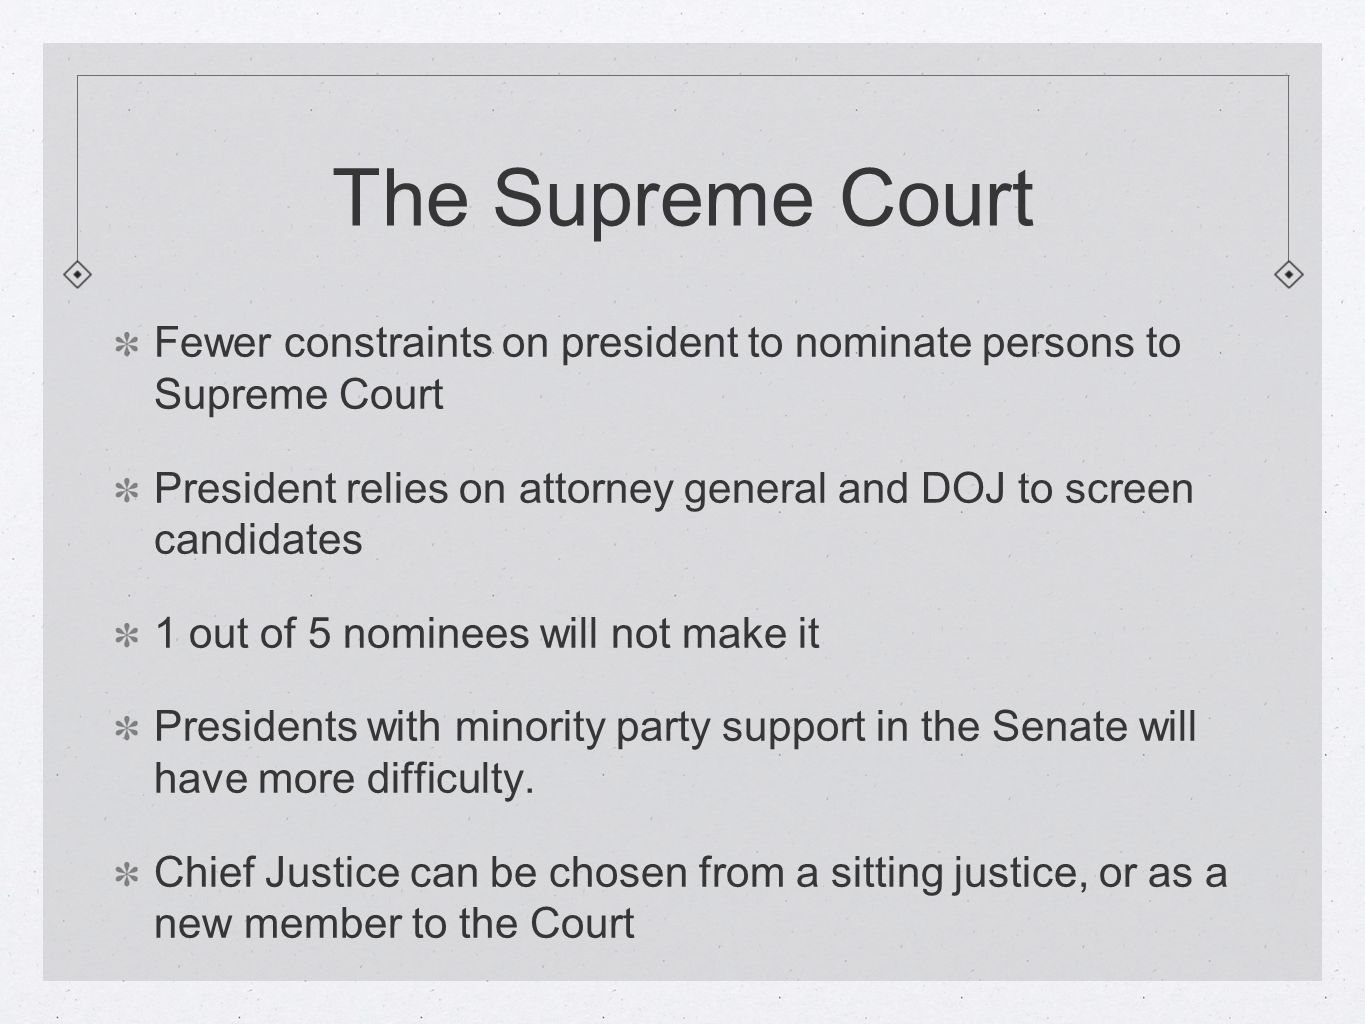 The Supreme Court Fewer constraints on president to nominate persons to Supreme Court.